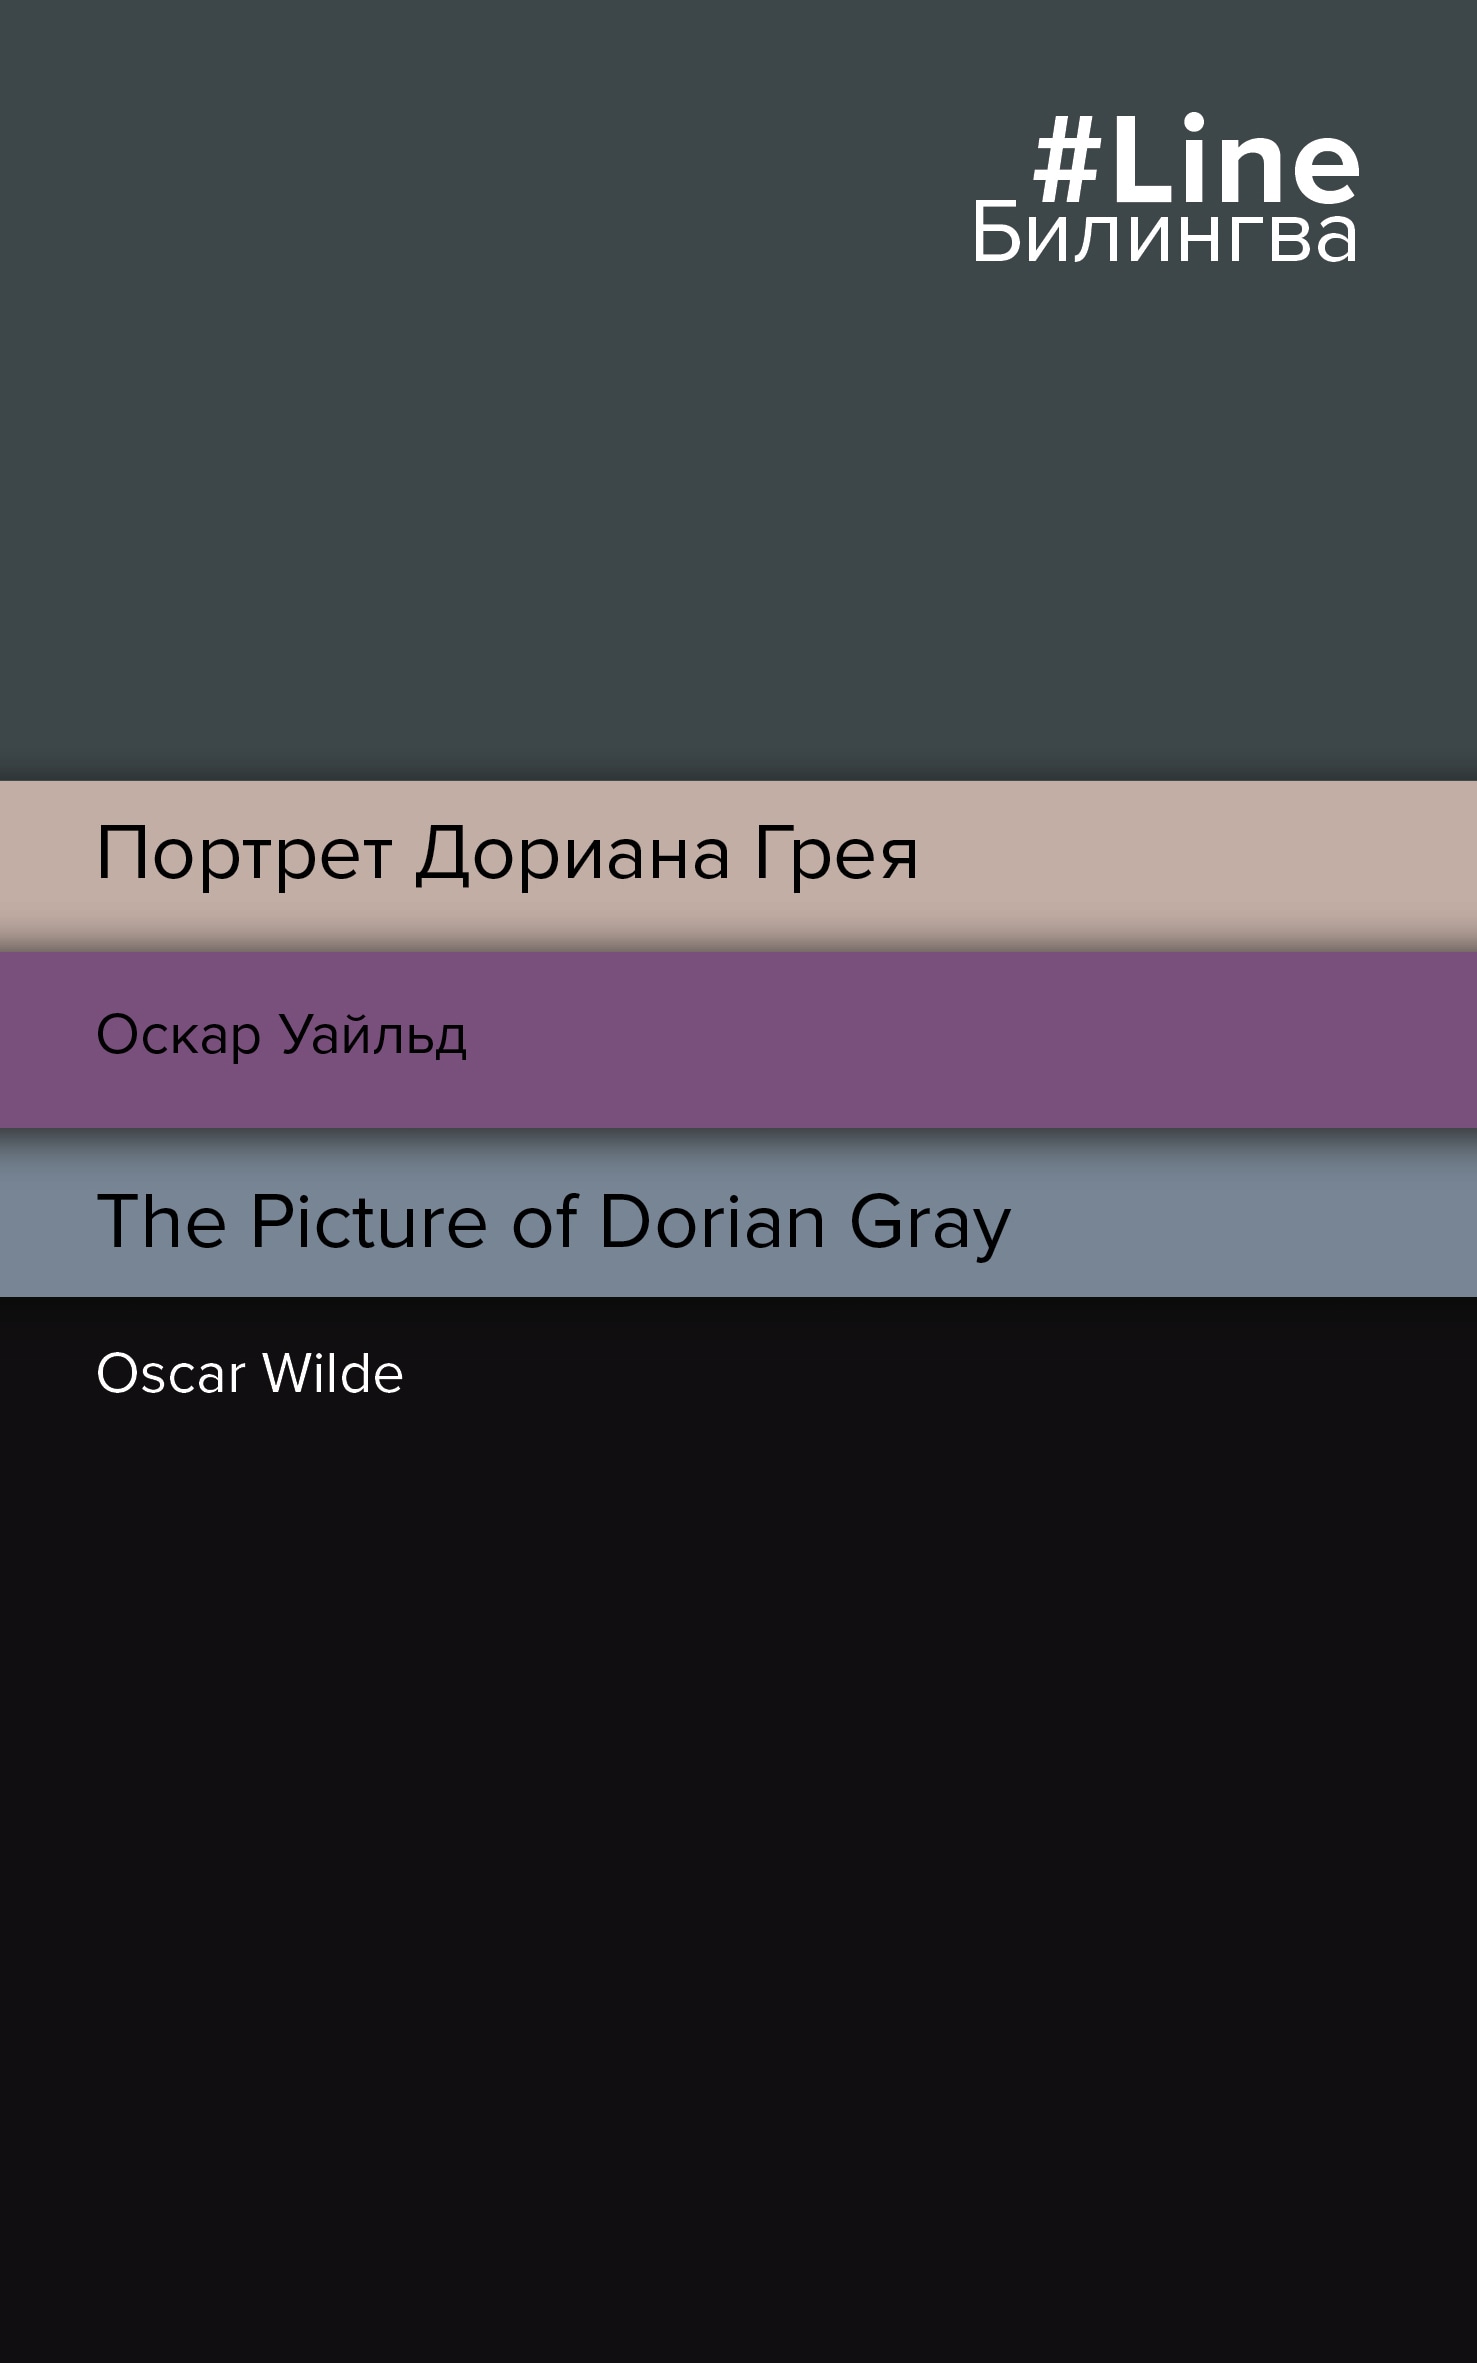 Book “Портрет Дориана Грея. The Picture of Dorian Gray” by Оскар Уайльд — August 1, 2022